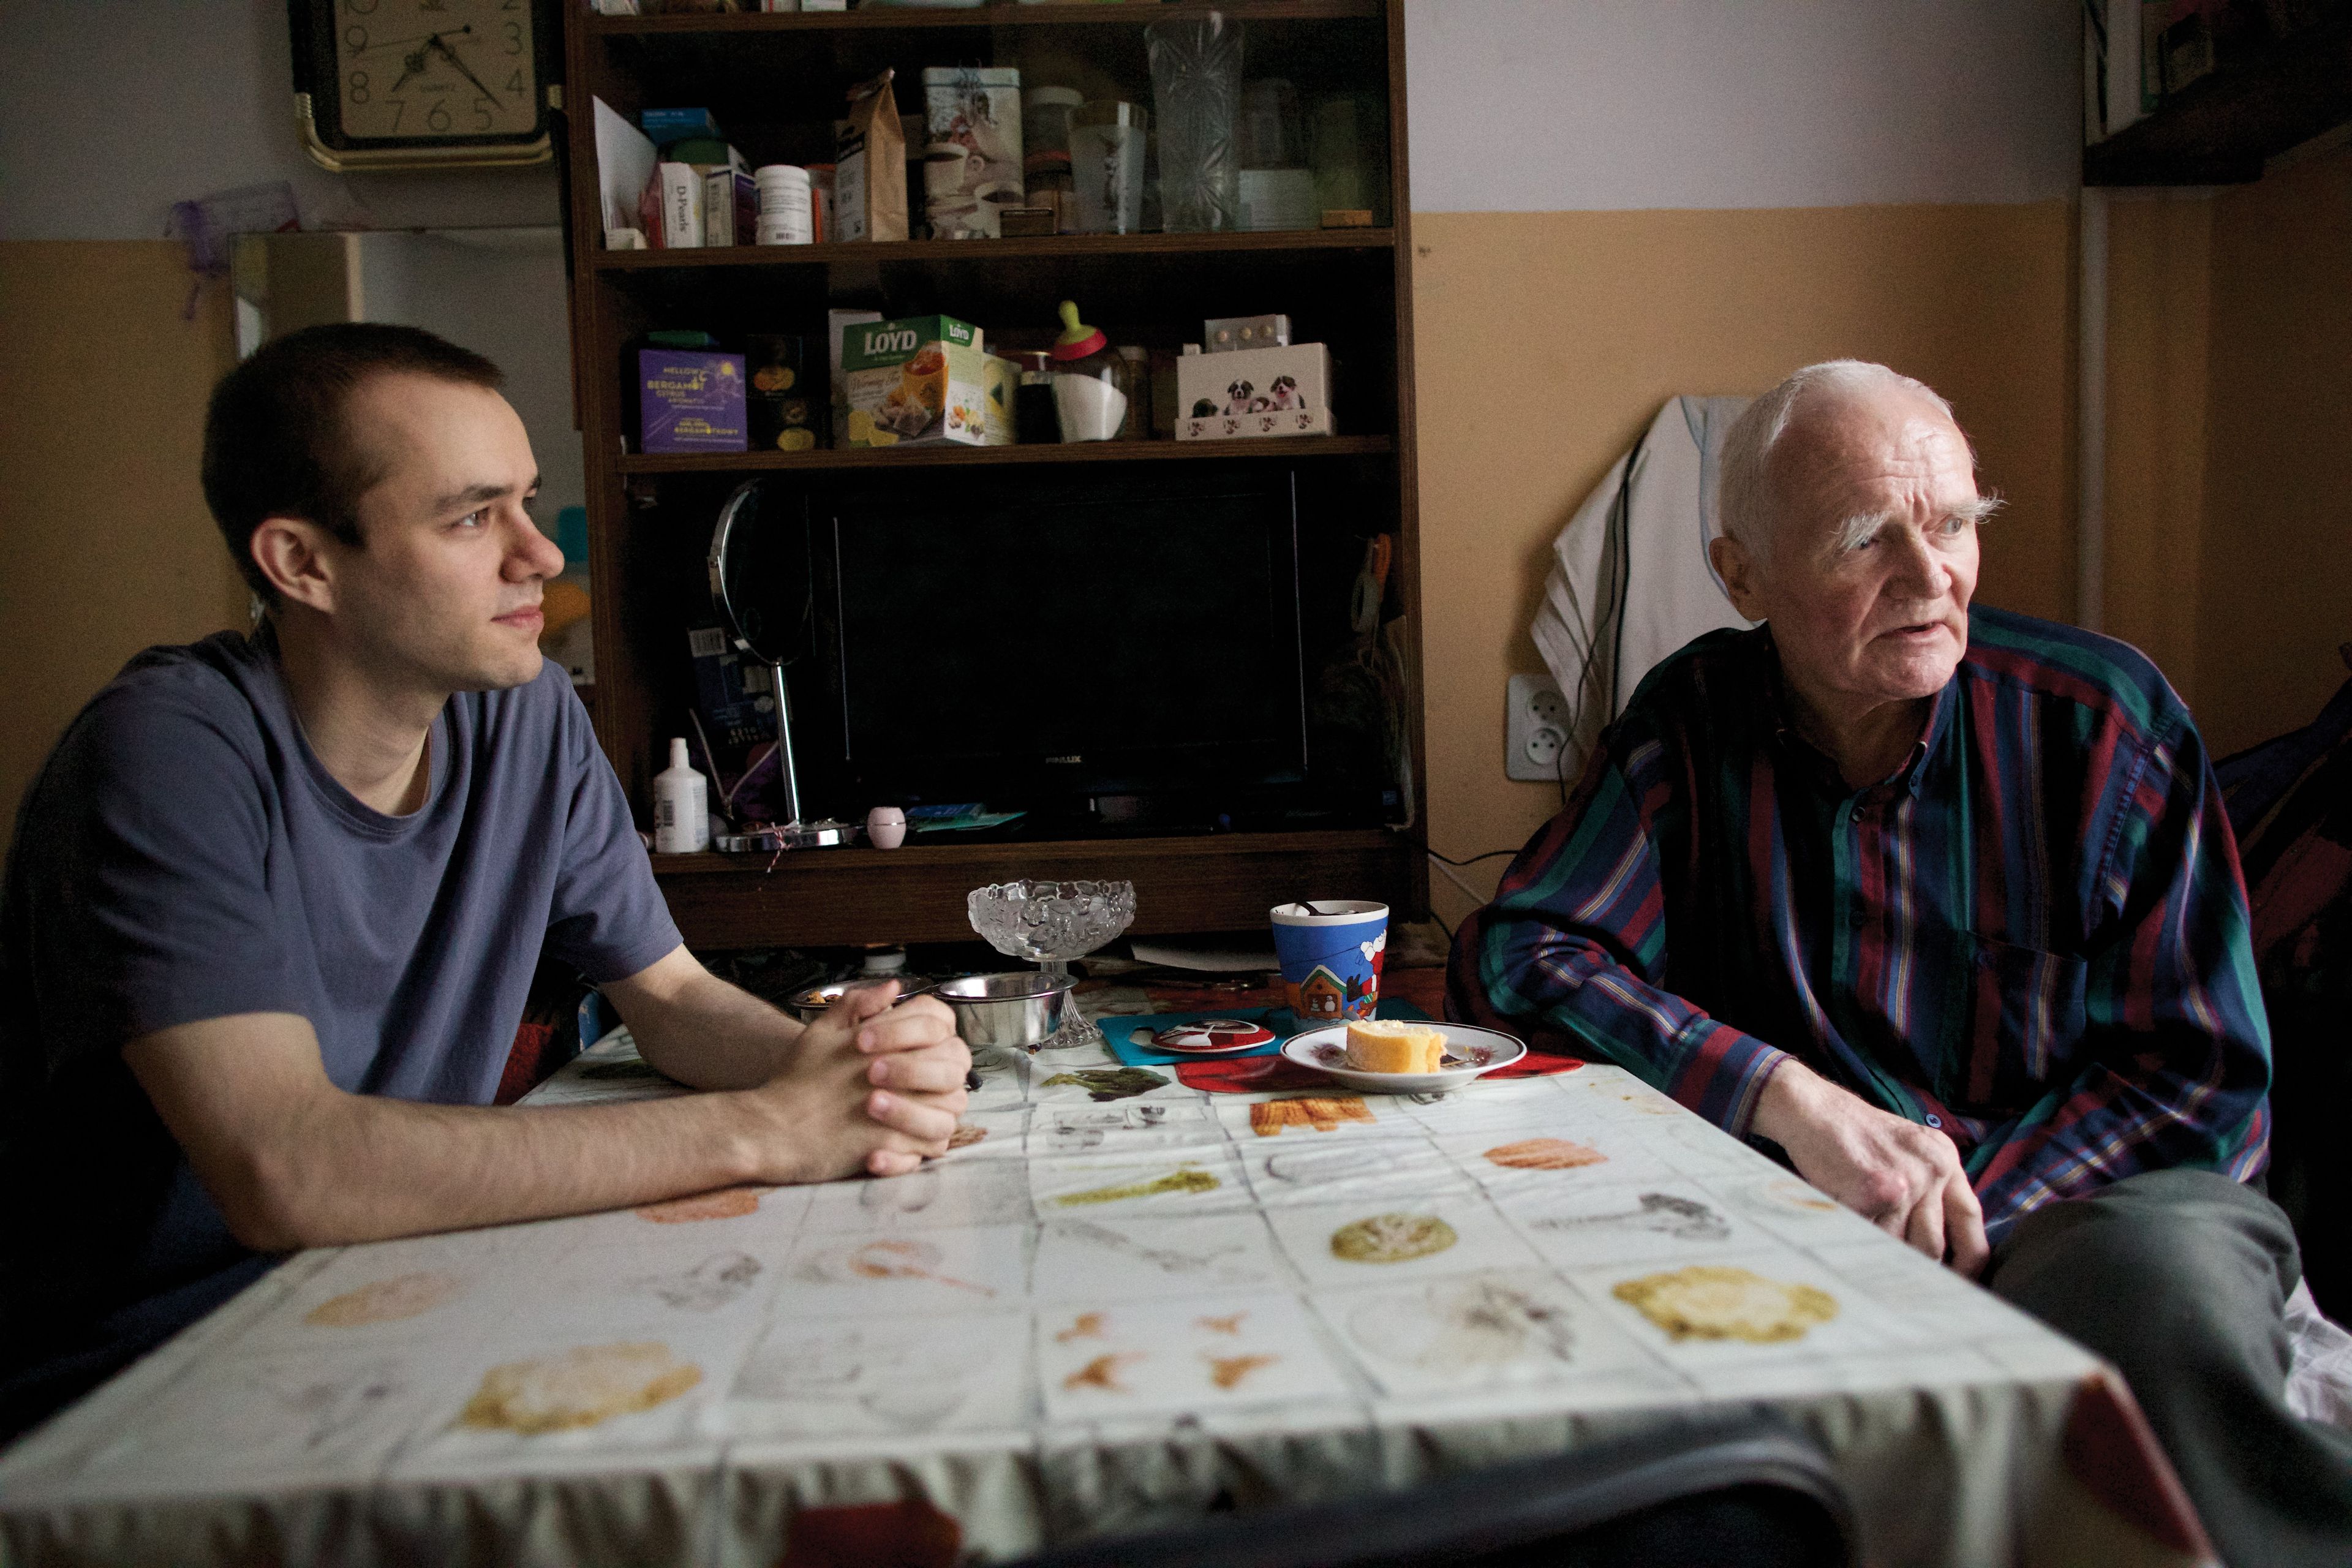 A grandfather and grandson sit together at a dining table in Latvia.